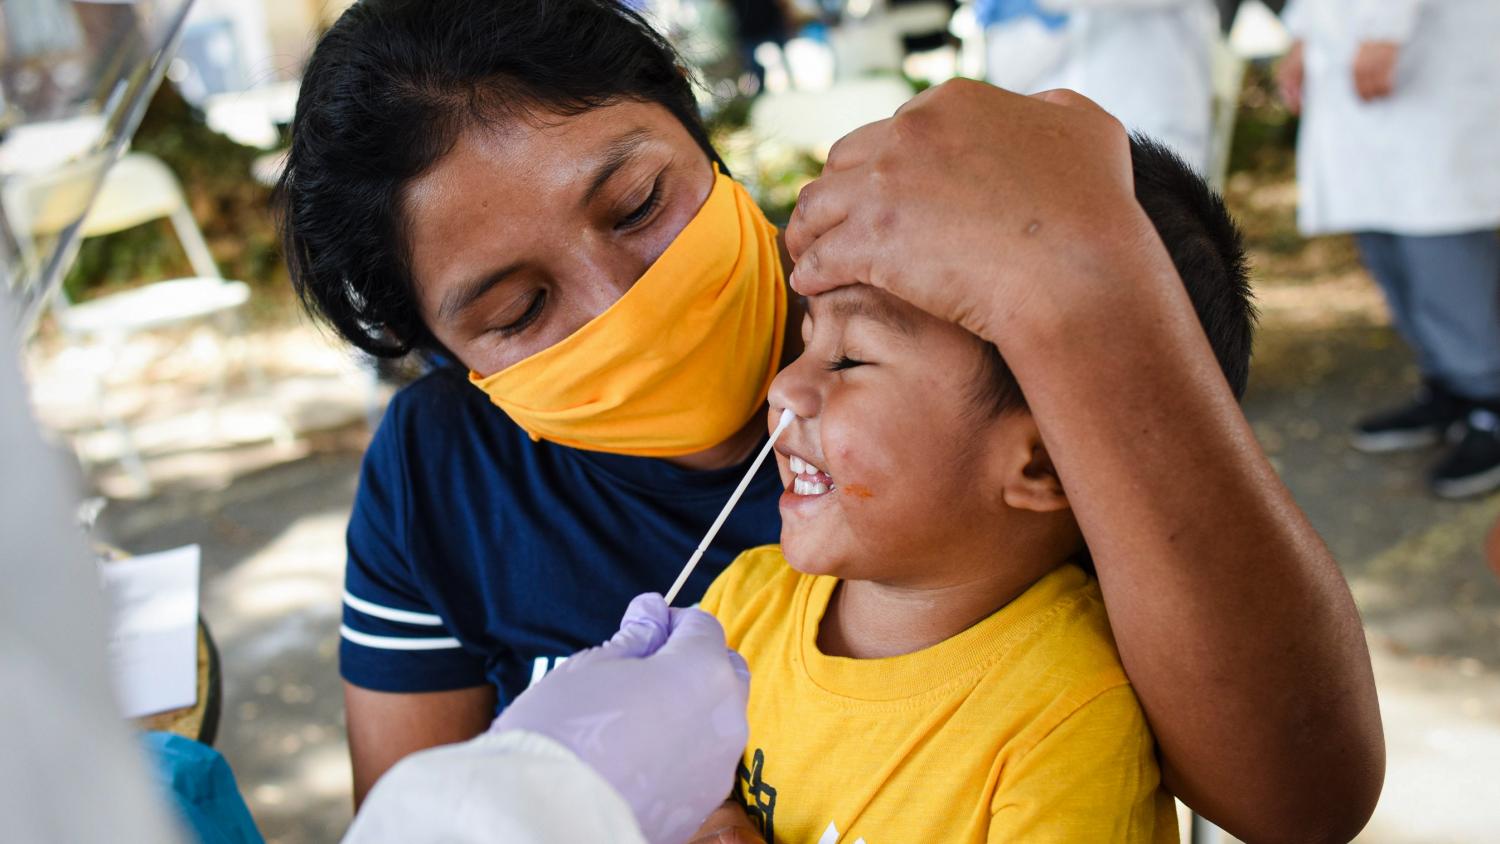 A volunteer healthcare worker swabs the nose of a young Latino boy. He is smiling while his mom hugs hugs him and holds his head.